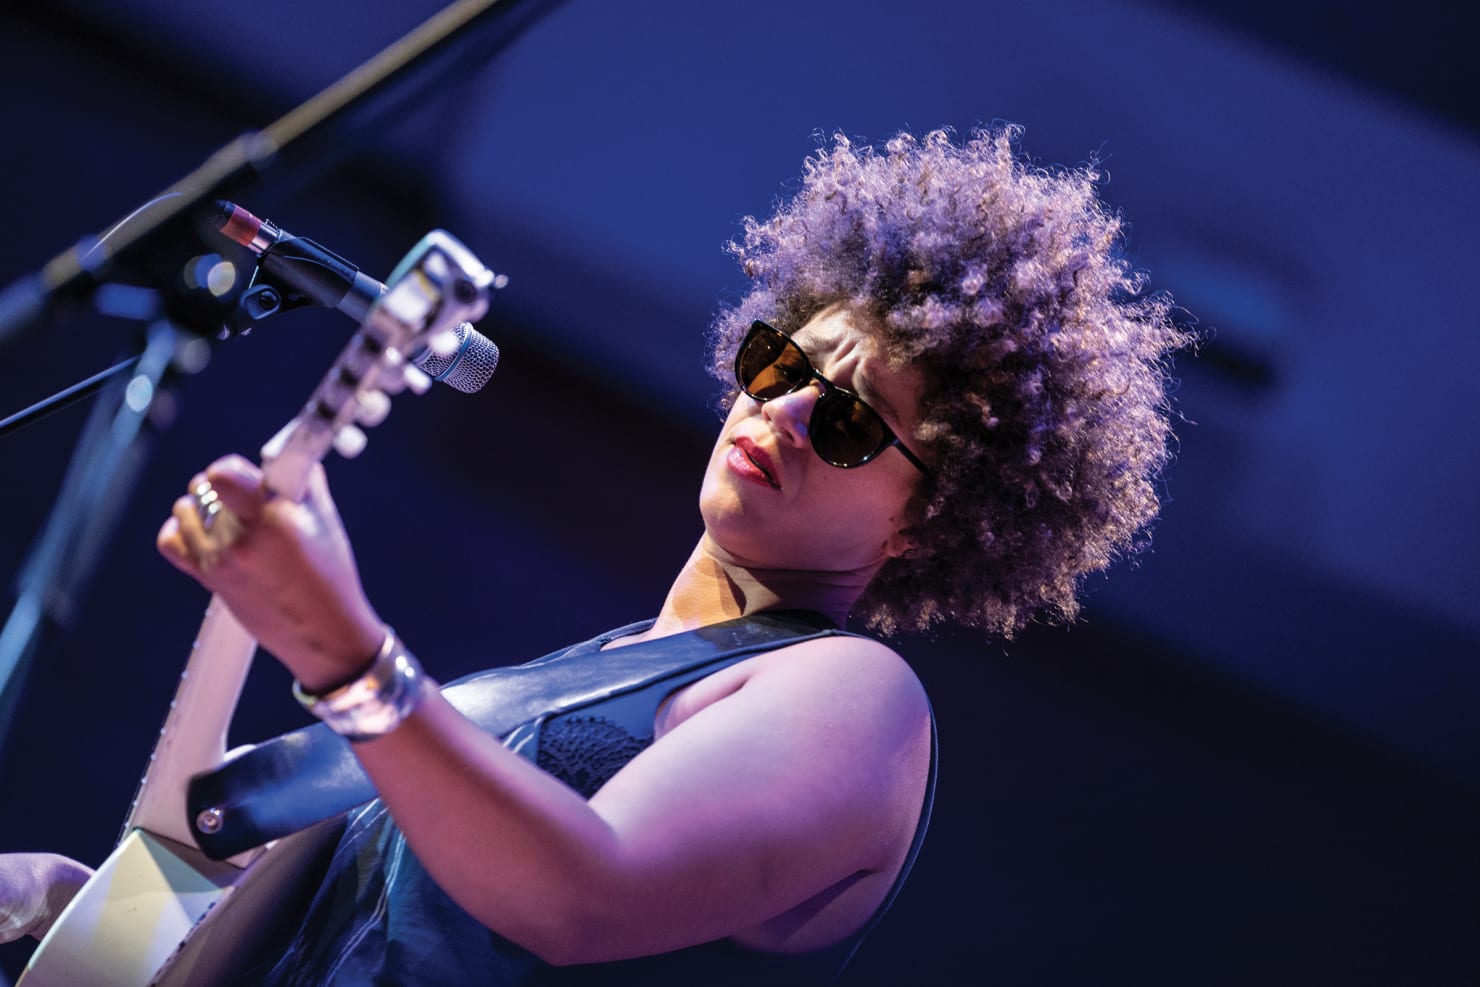 An image of Chastity Brown, onstage, playing the guitar.